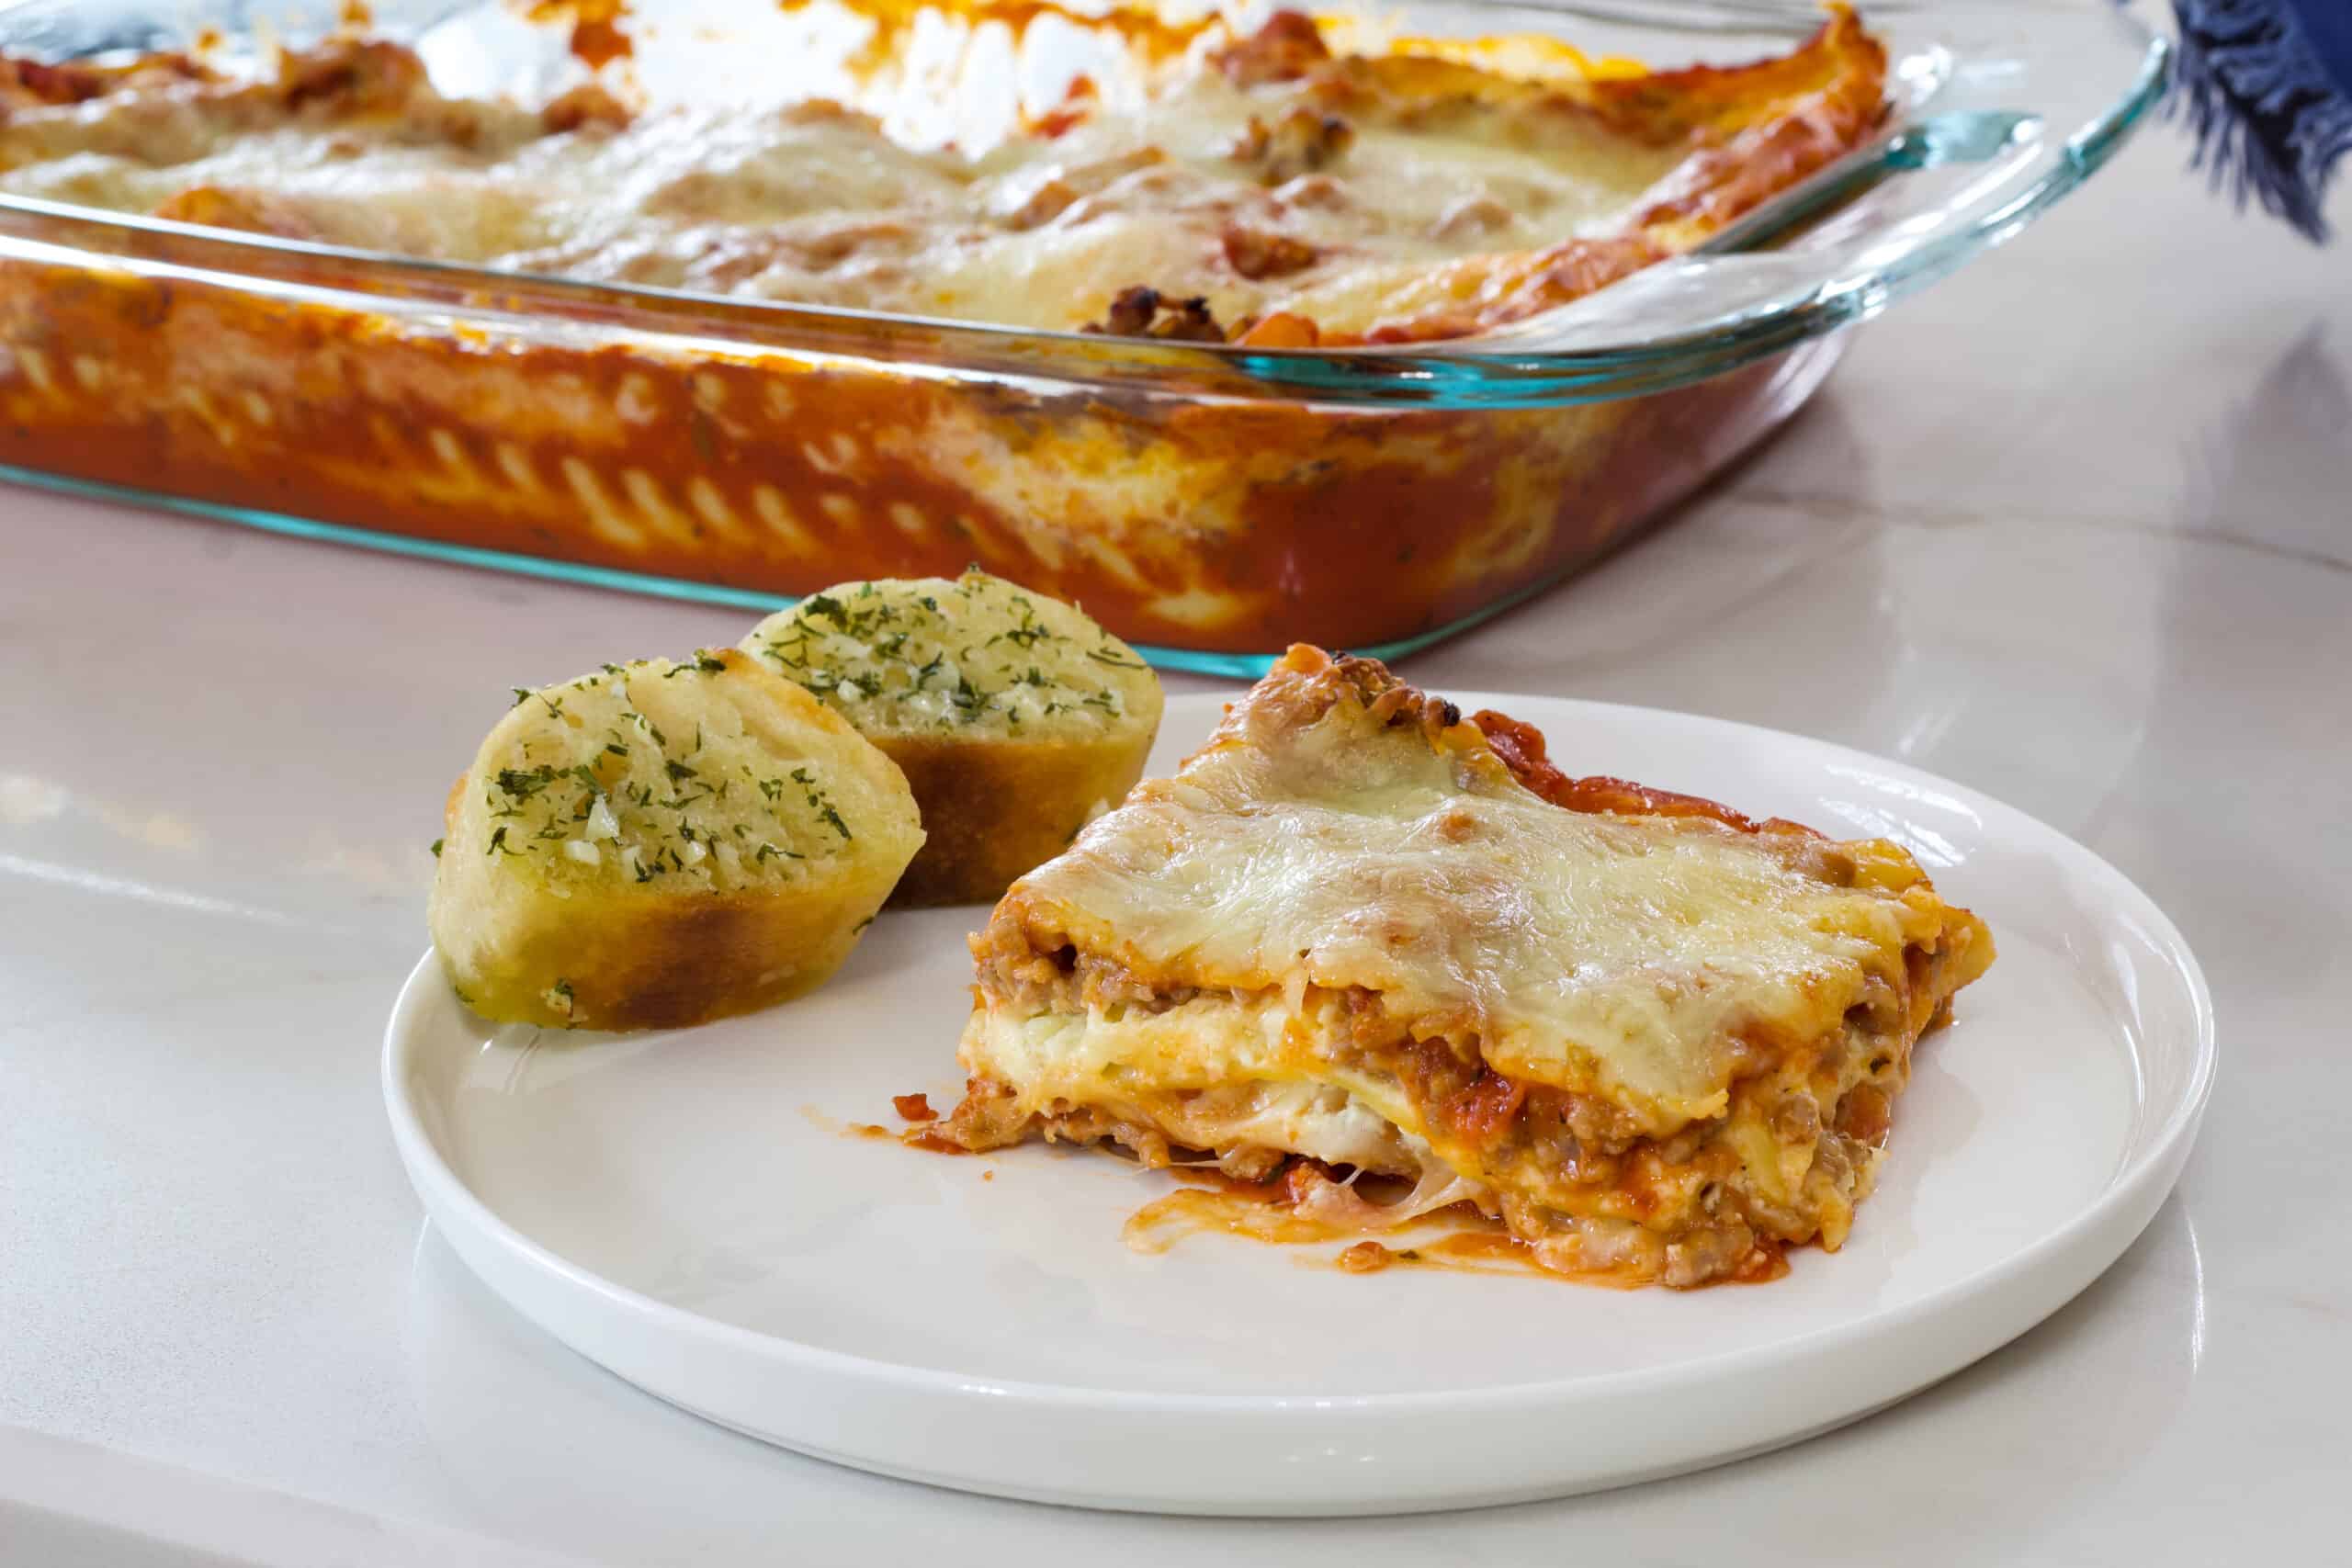 One serving of lasagna and two pieces of bread on a plate and the pan of lasagna in the background.